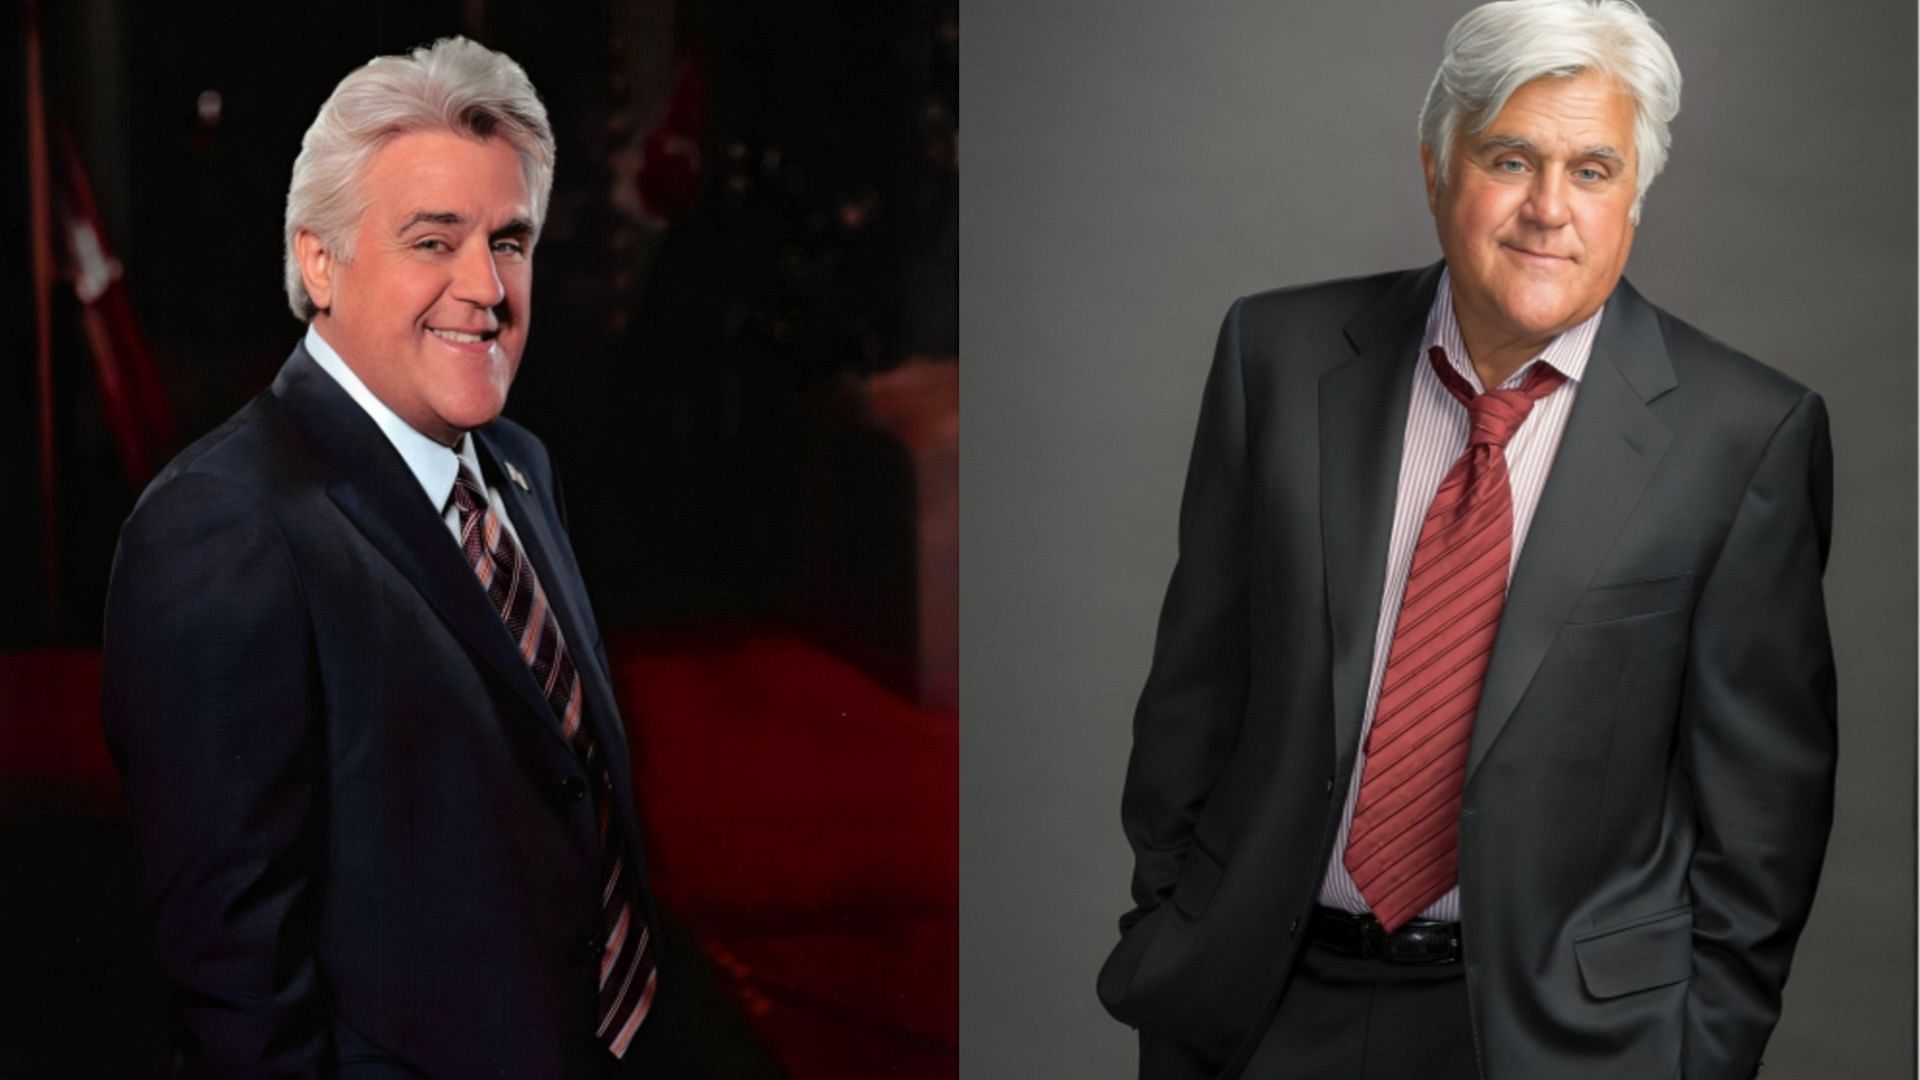 Jay Leno recently filed for conservatorship following his wife